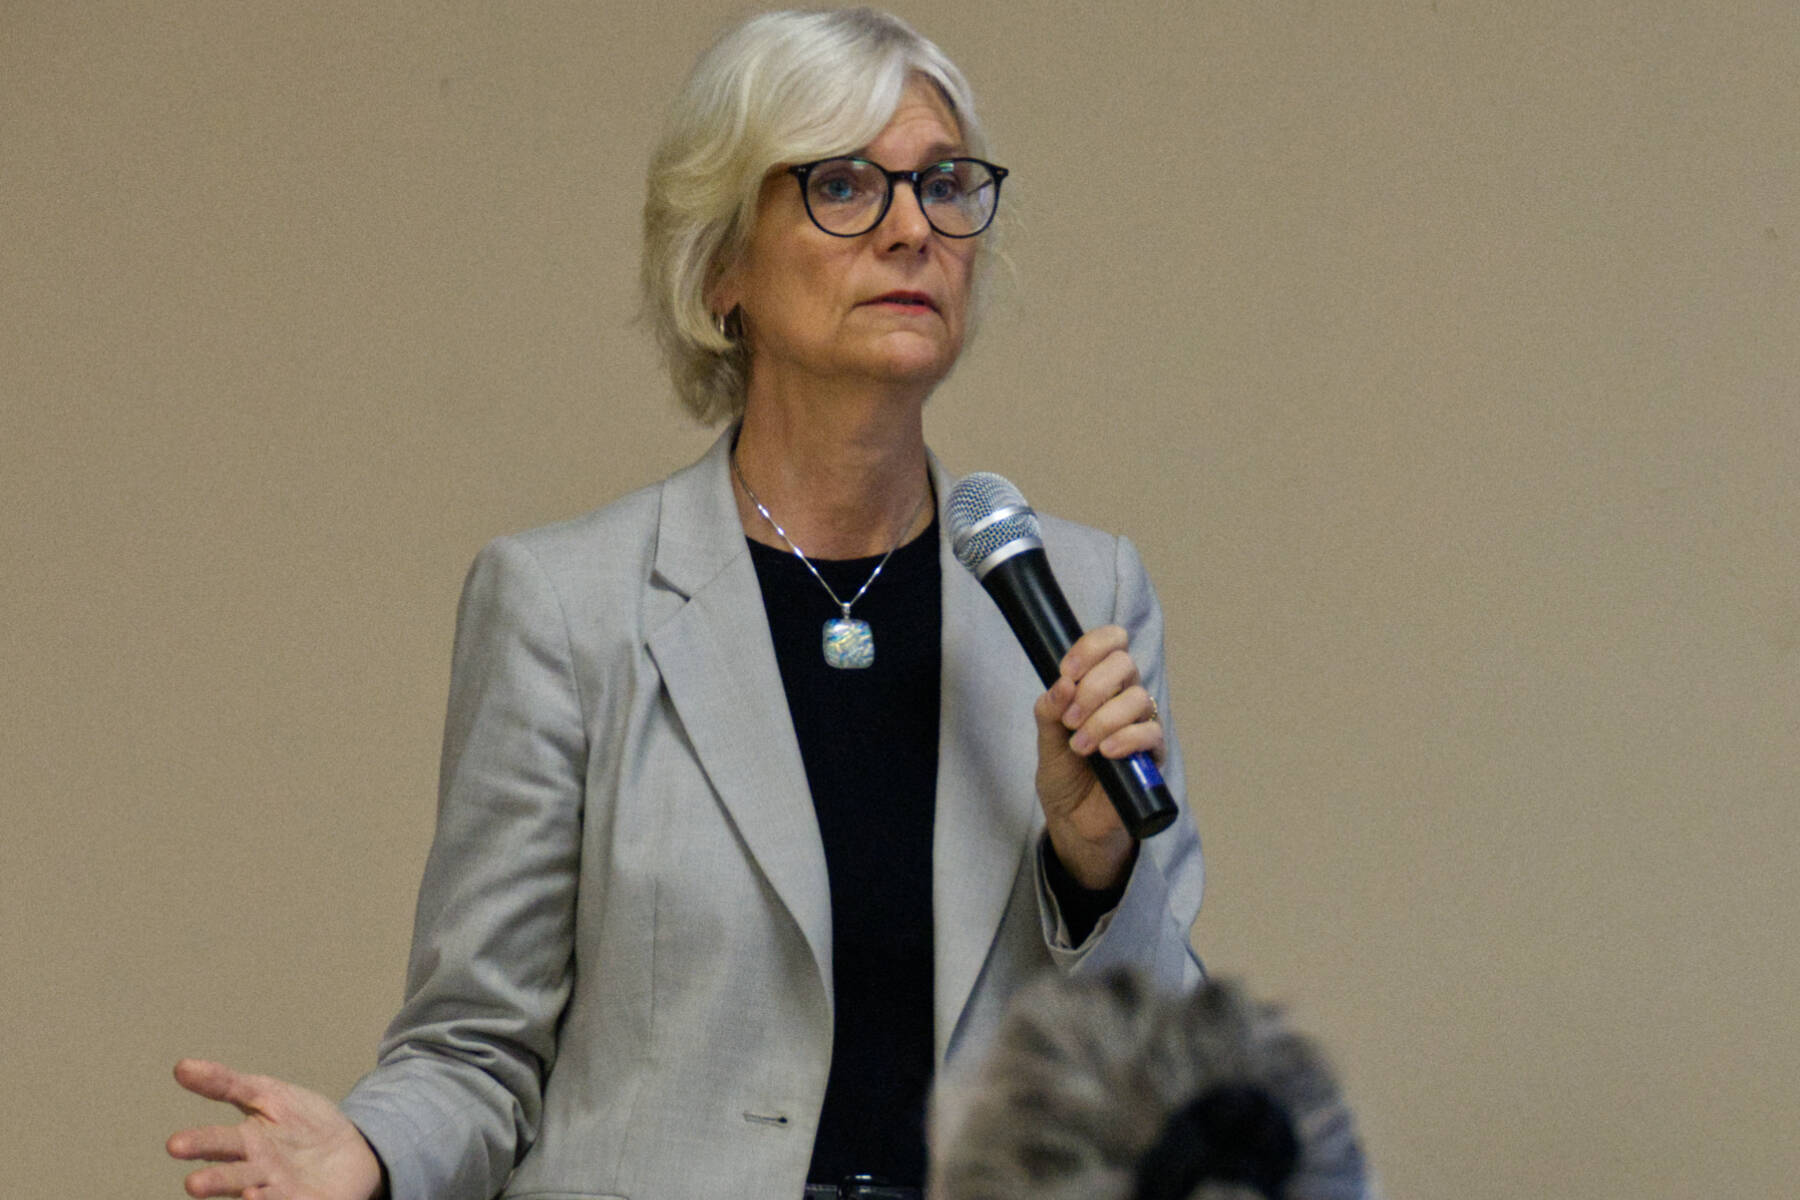 B.C. Seniors Advocate Isobel Mackenzie has been encouraging seniors to consider using the deferral program, saying it can provide “meaningful cost relief.” (Trevor Crawley/Black Press)